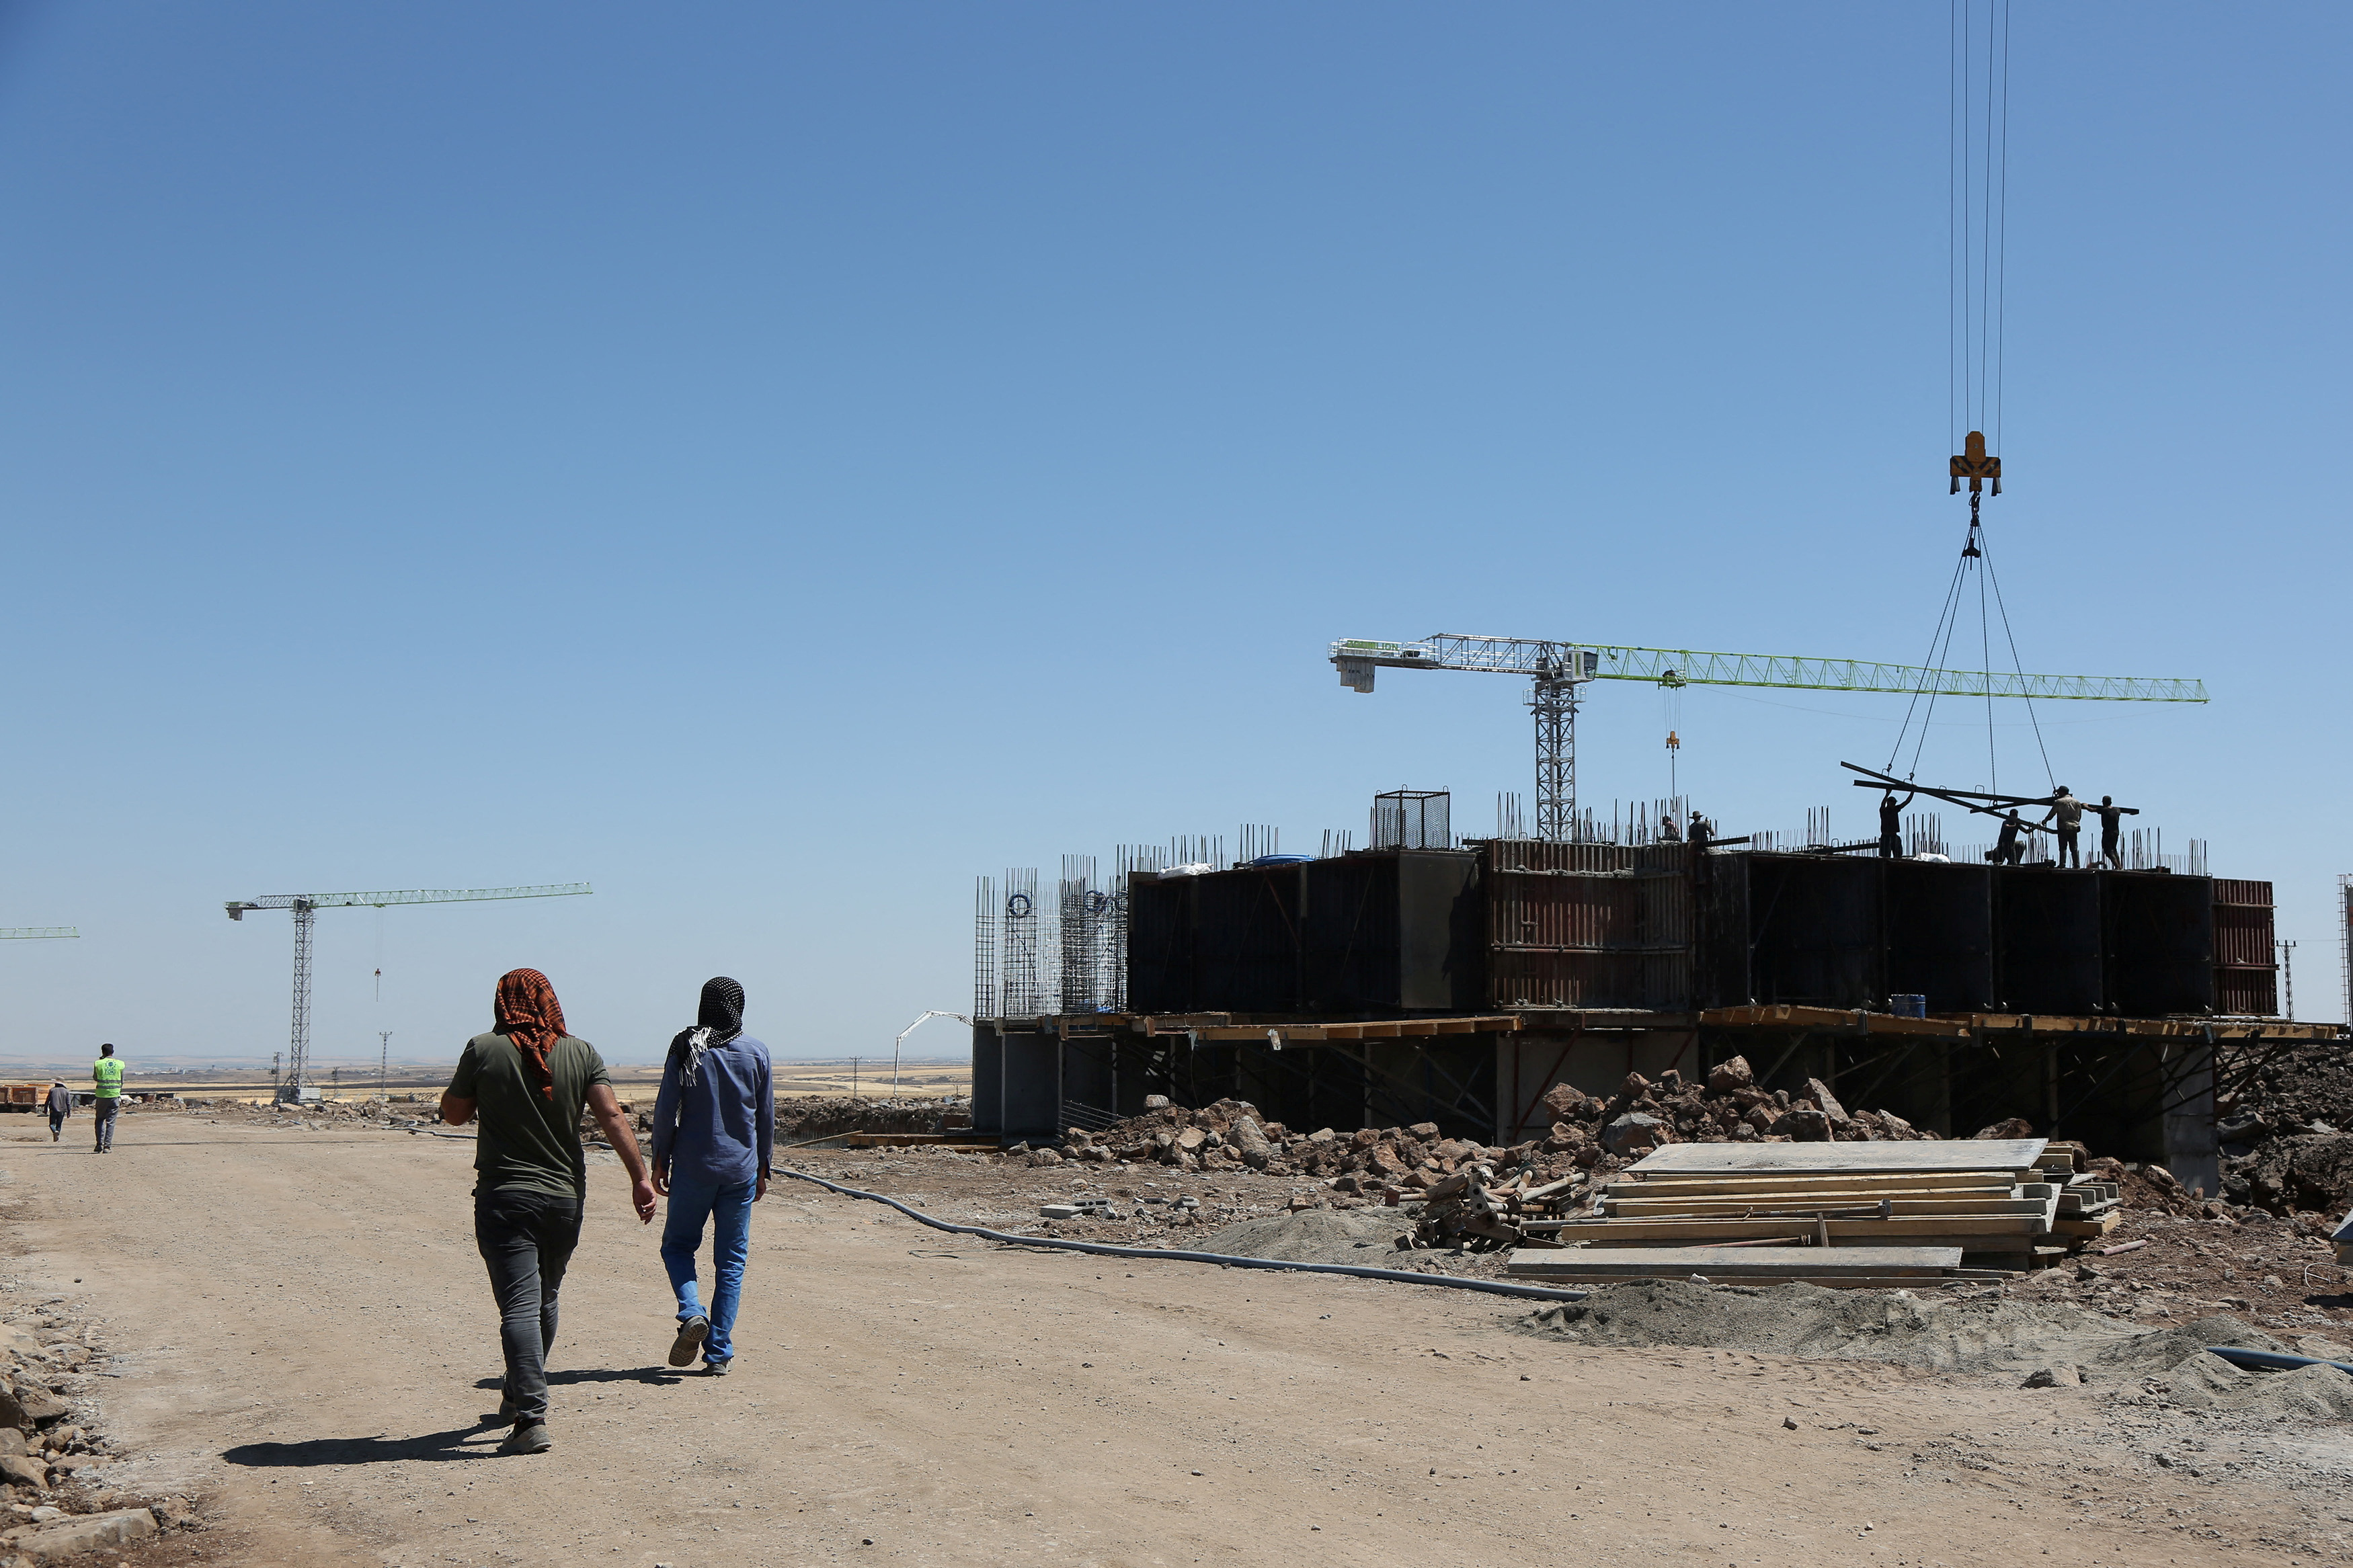 A new building for earthquake survivors is under construction in Diyarbakir